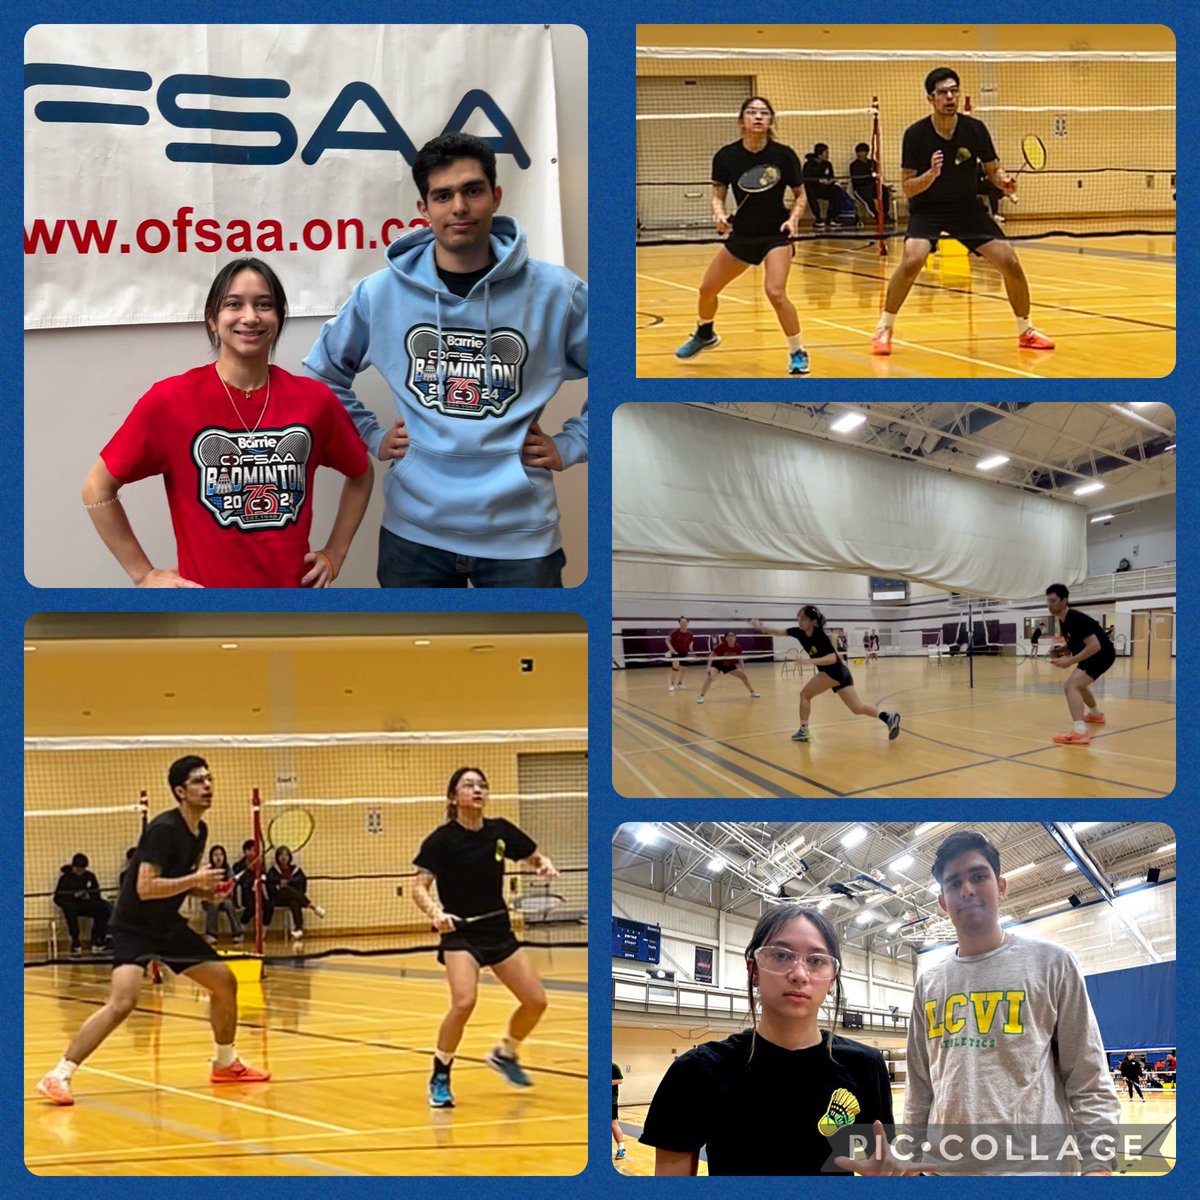 Proud of LC’s Mixed Doubles Team, Tasha & Ali, for their exceptional play at the OFSAA Championships over the past 2 days🏸💚💛 Semi final loss in the c flight consolation round in an exciting 3 set match👏🏻 Well done, Lancers💚💛 @LCVI_LDSB @LCAthleticsLDSB